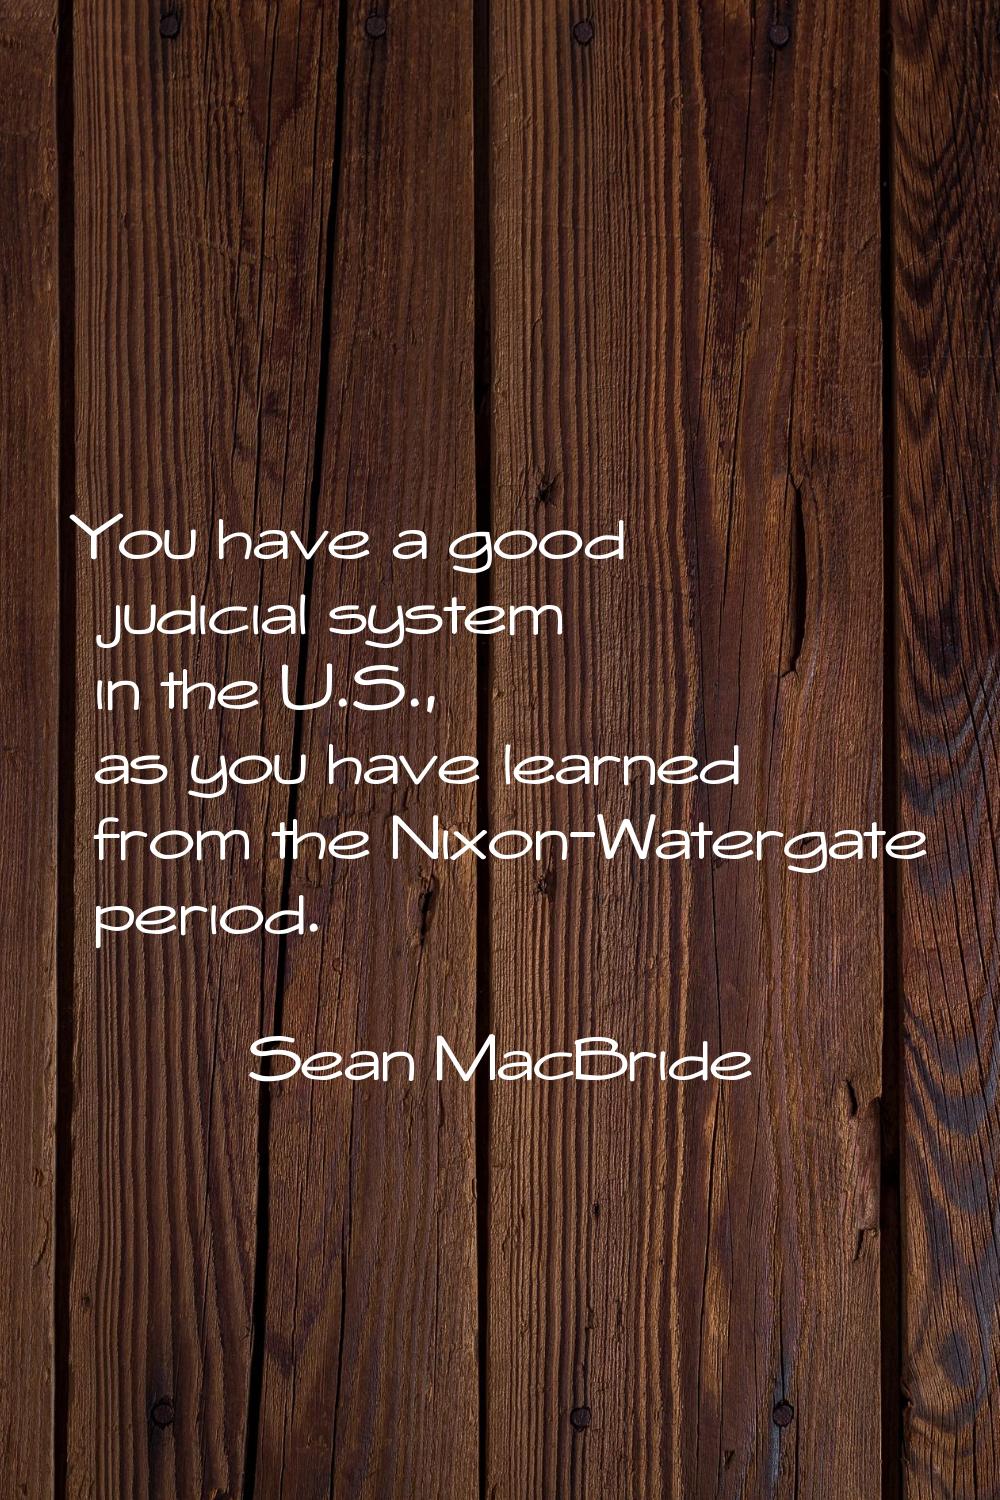 You have a good judicial system in the U.S., as you have learned from the Nixon-Watergate period.